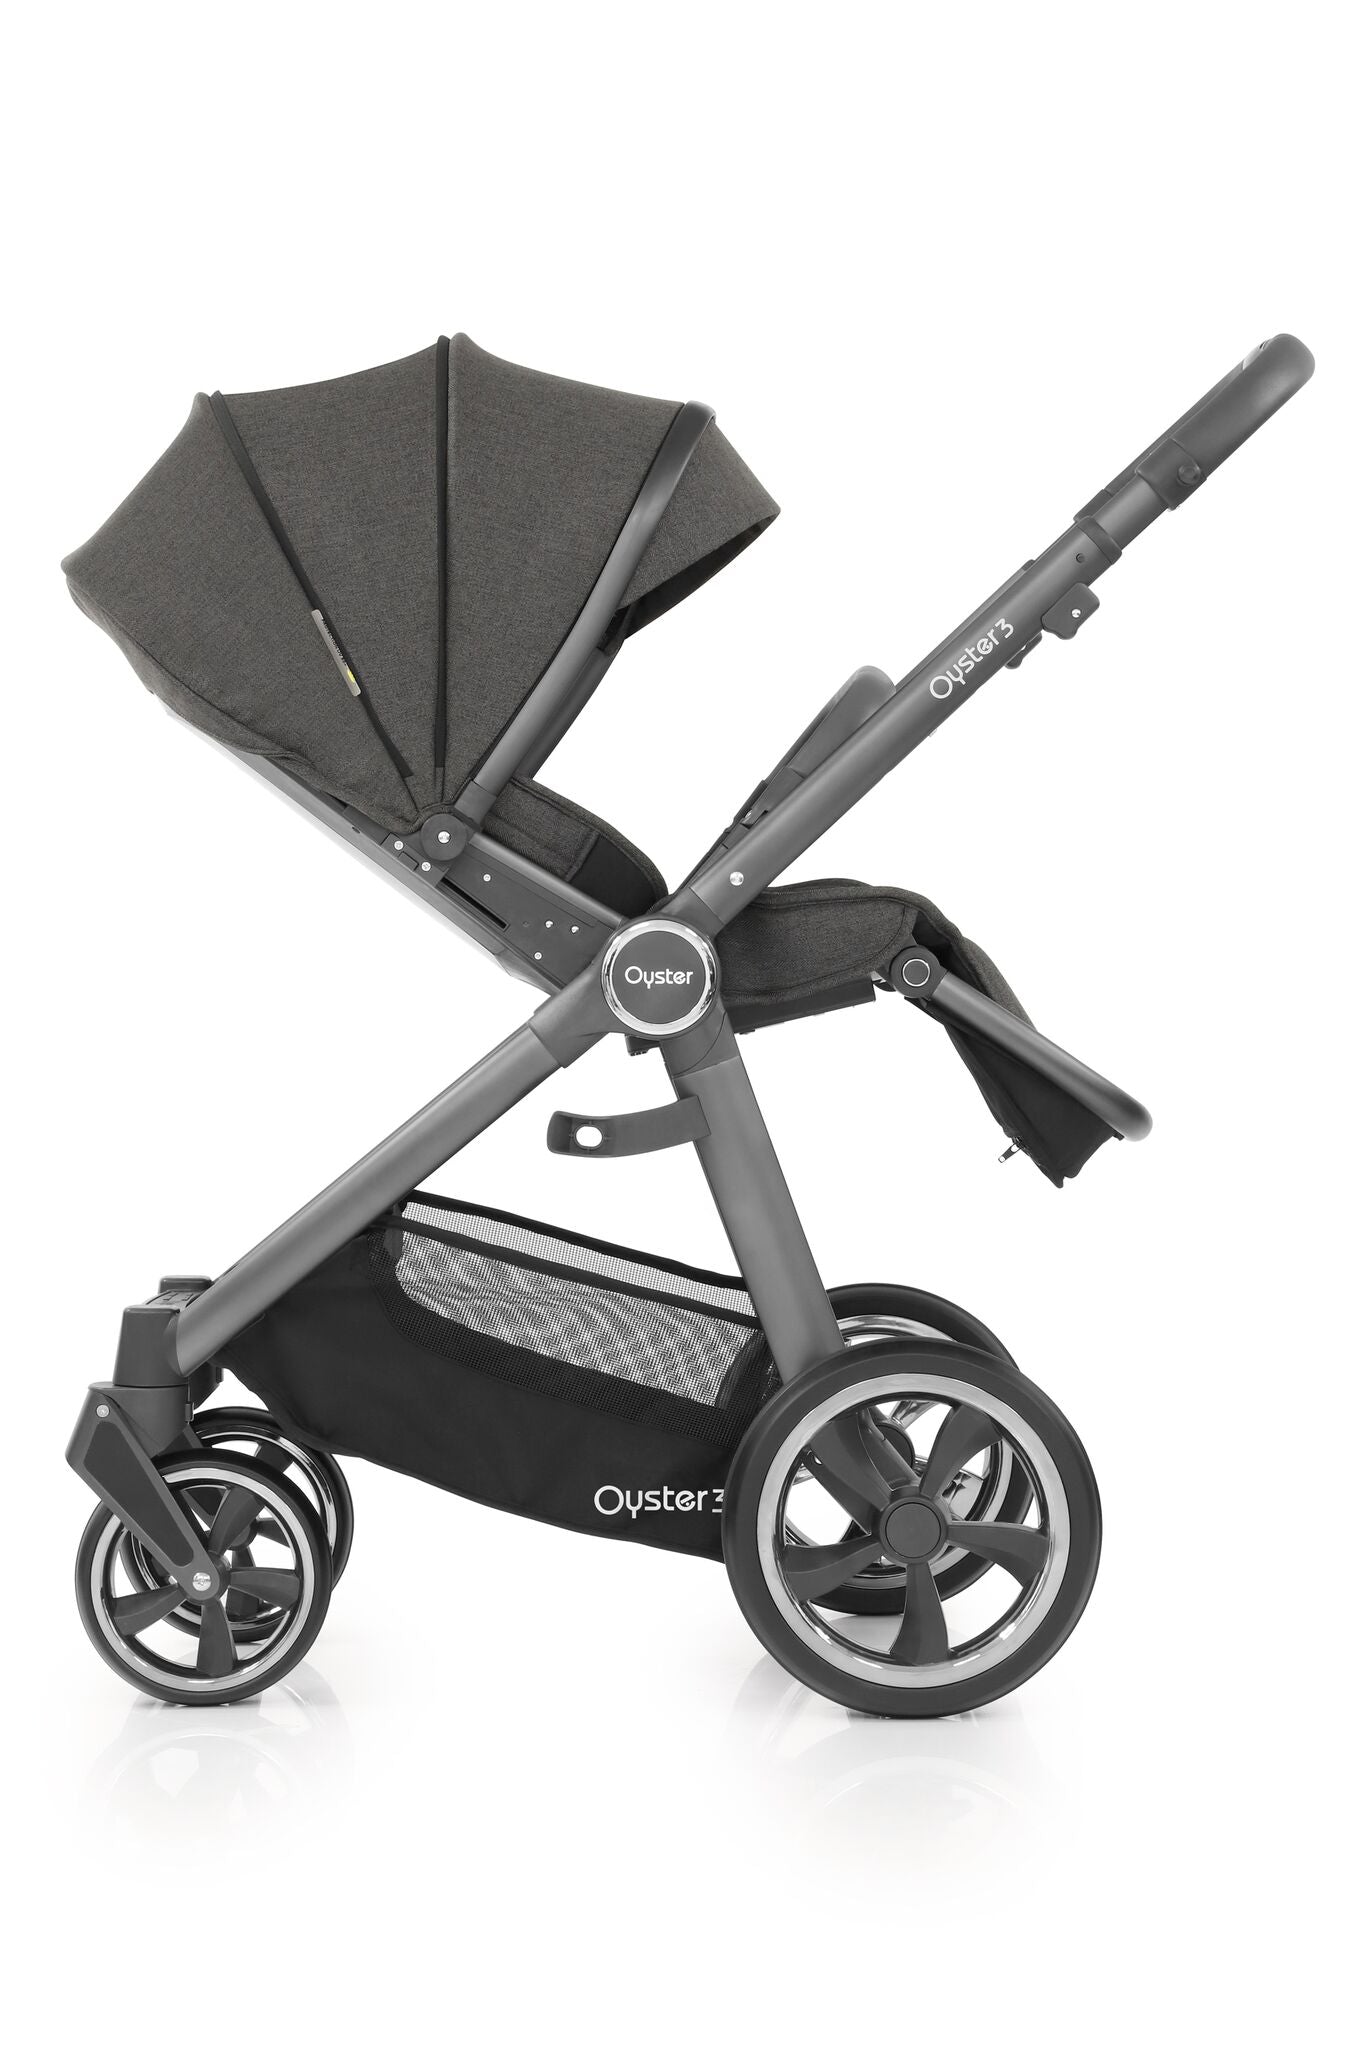 Babystyle Oyster 3 Stroller & Carrycot - Pepper